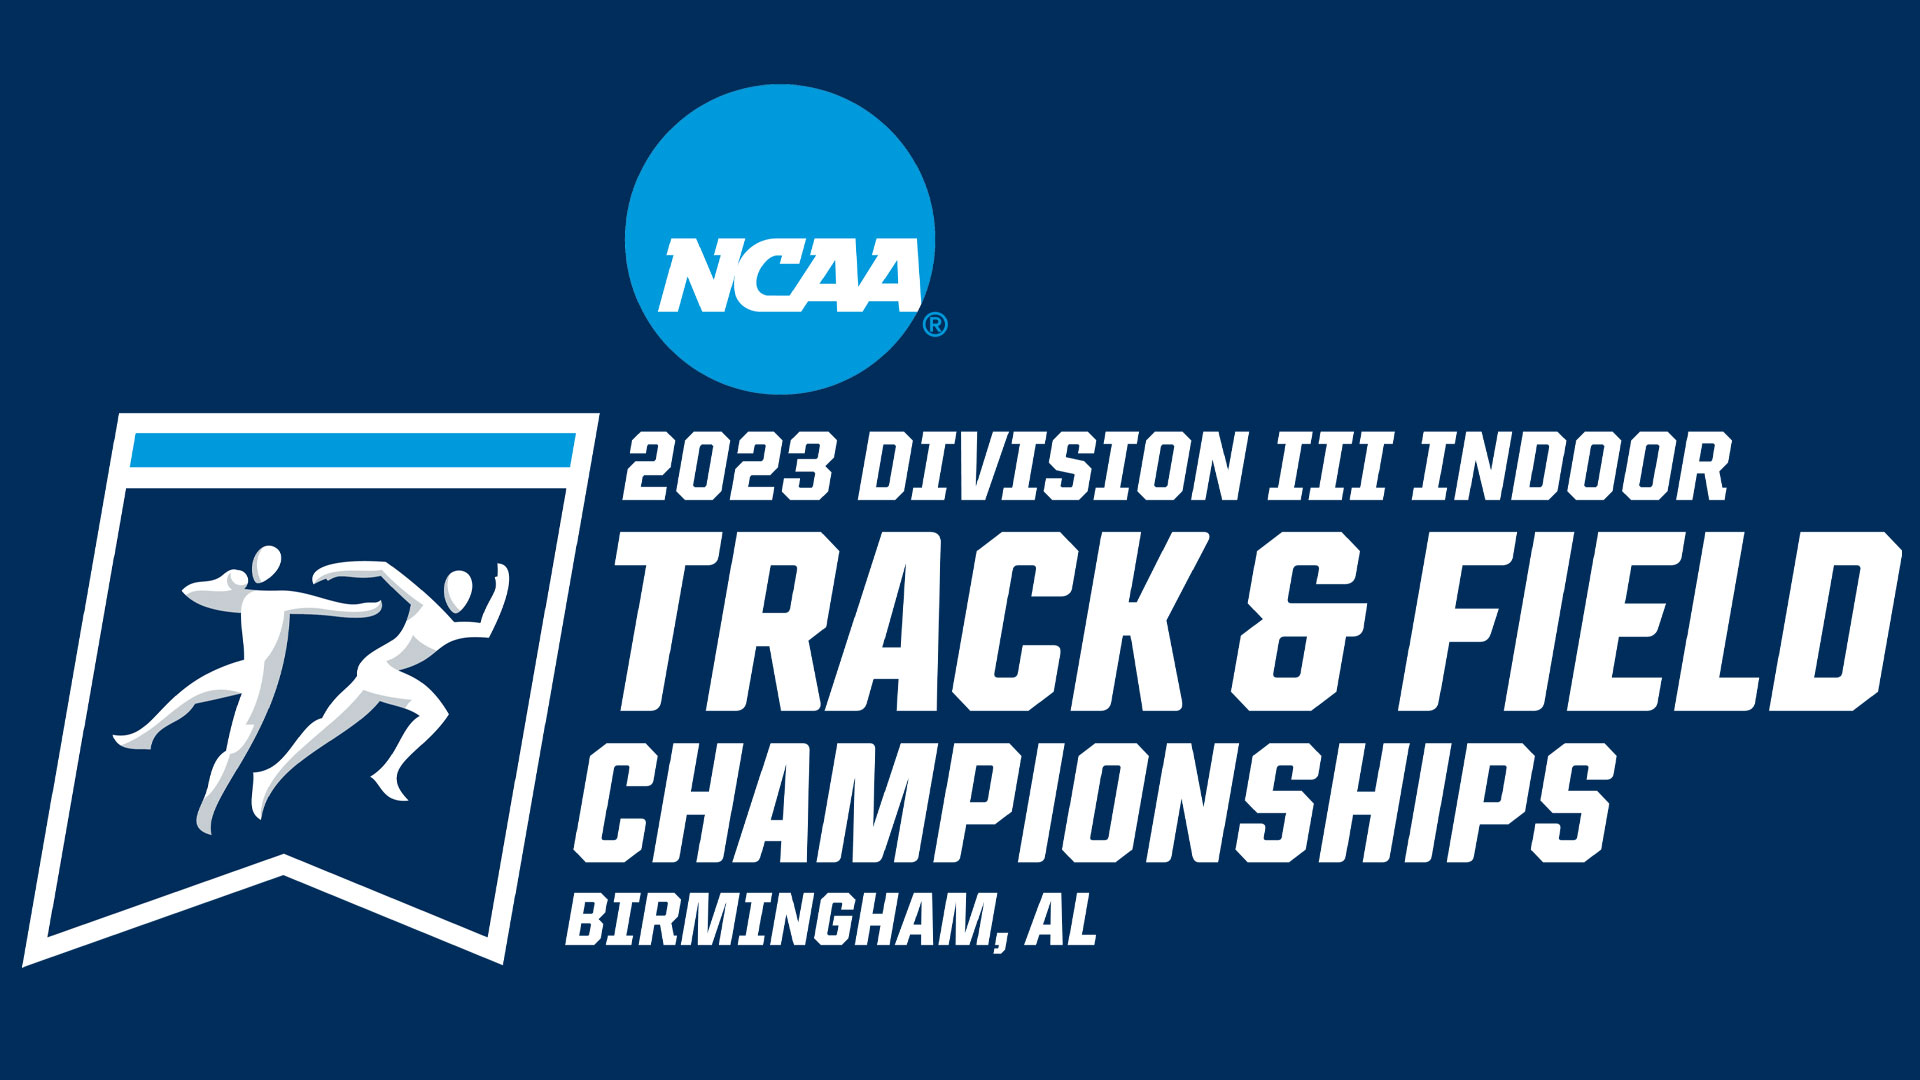 Barre and Giordani Repeat as Invitees to NCAA Women’s Indoor Track and Field Championships